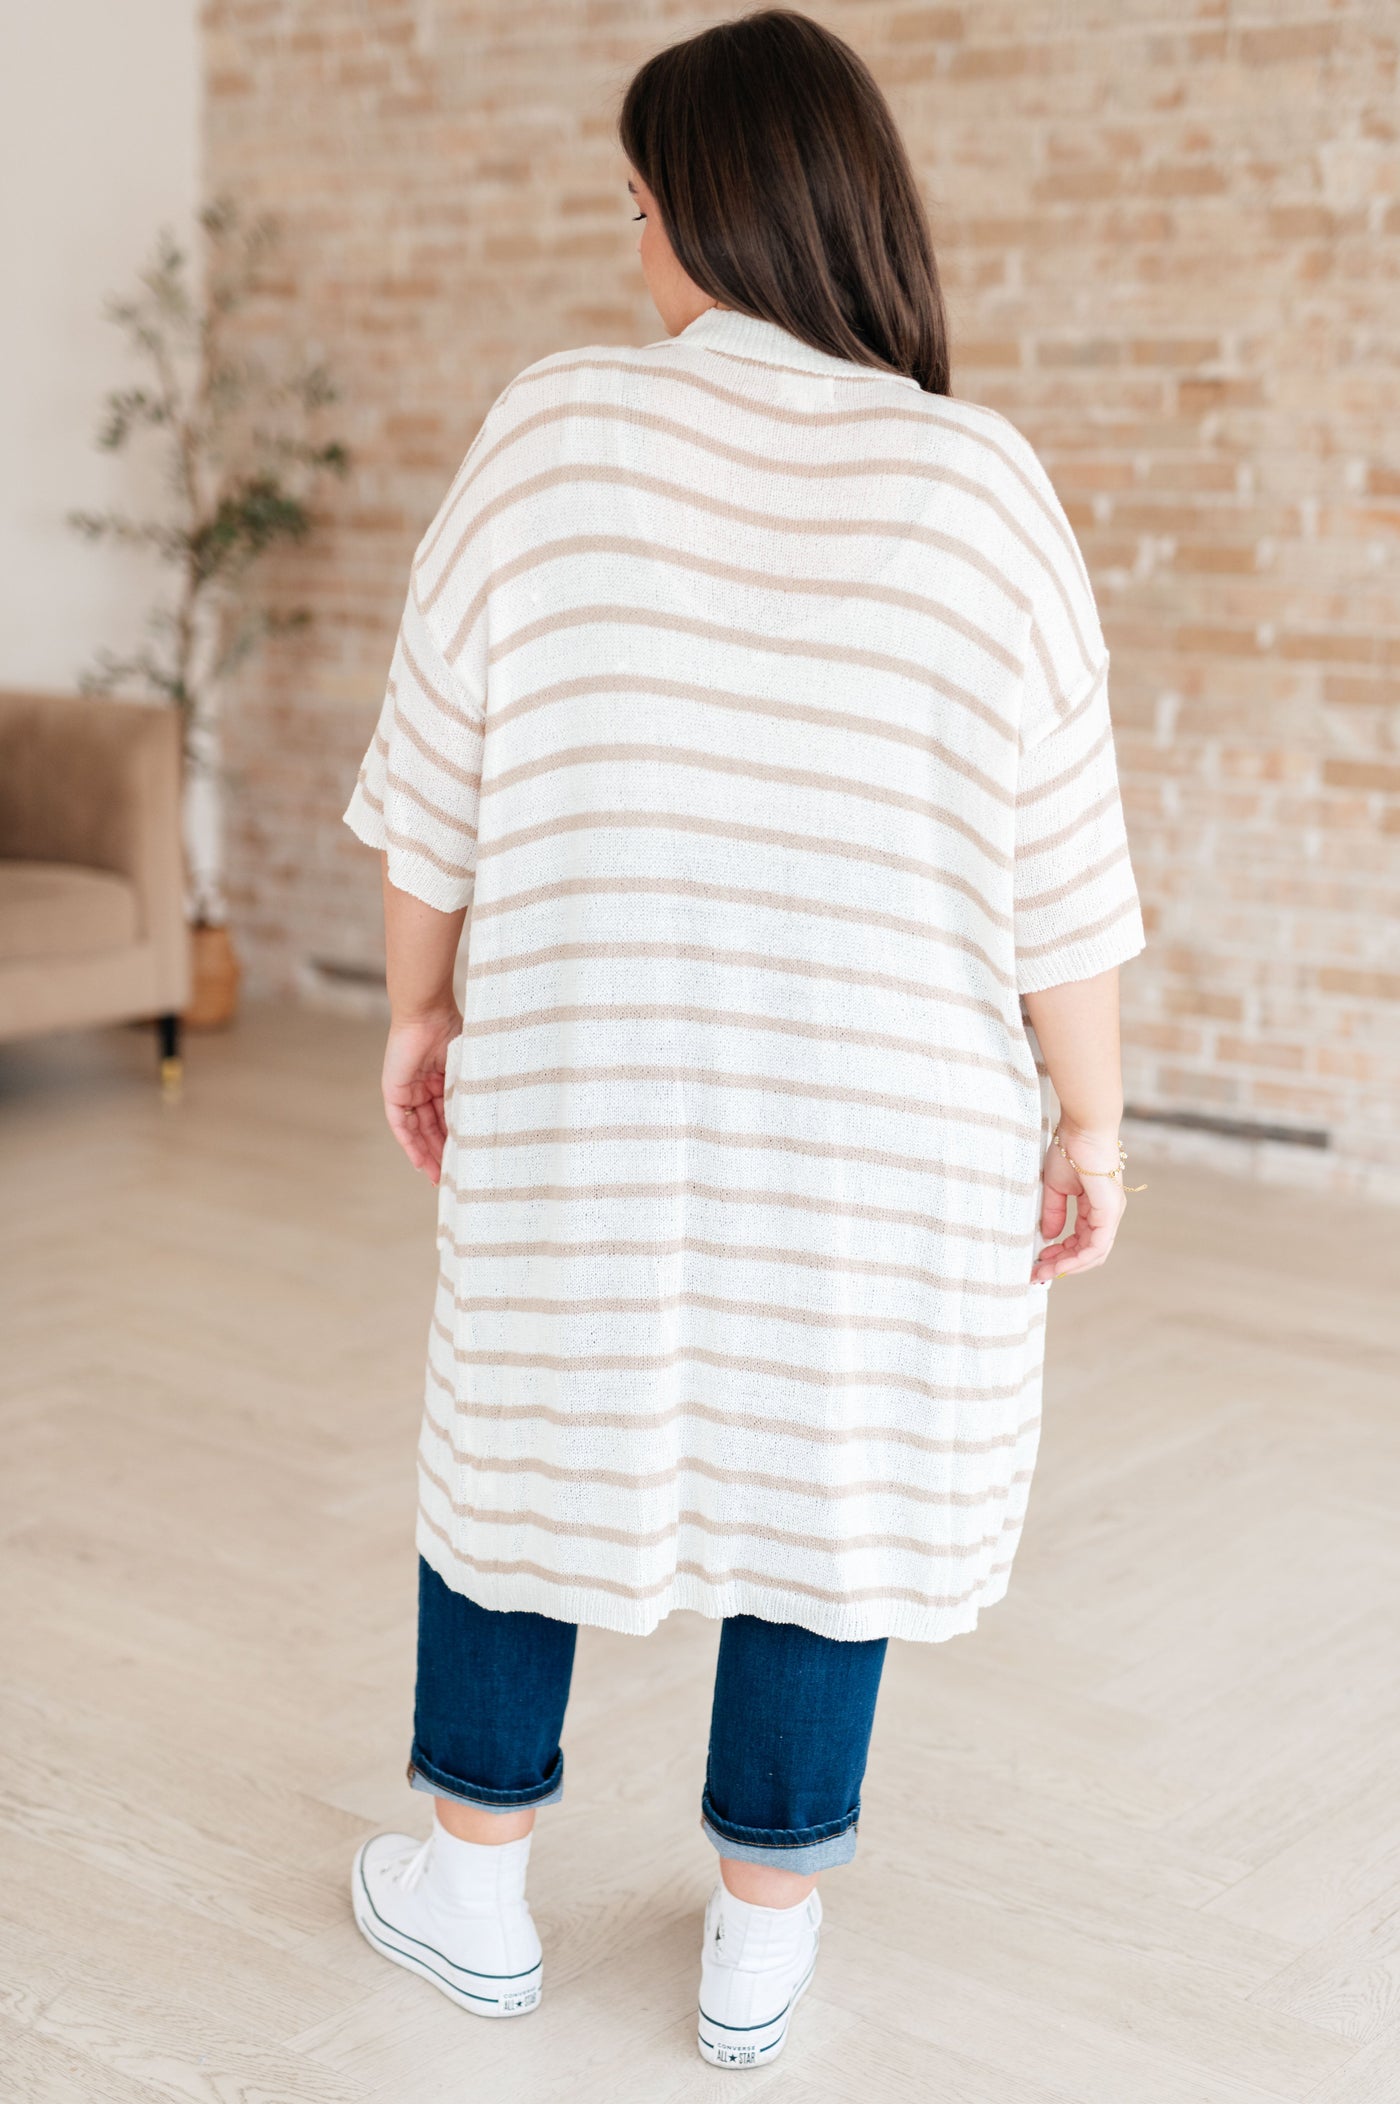 Easy Street Striped Dress Dresses Southern Soul Collectives